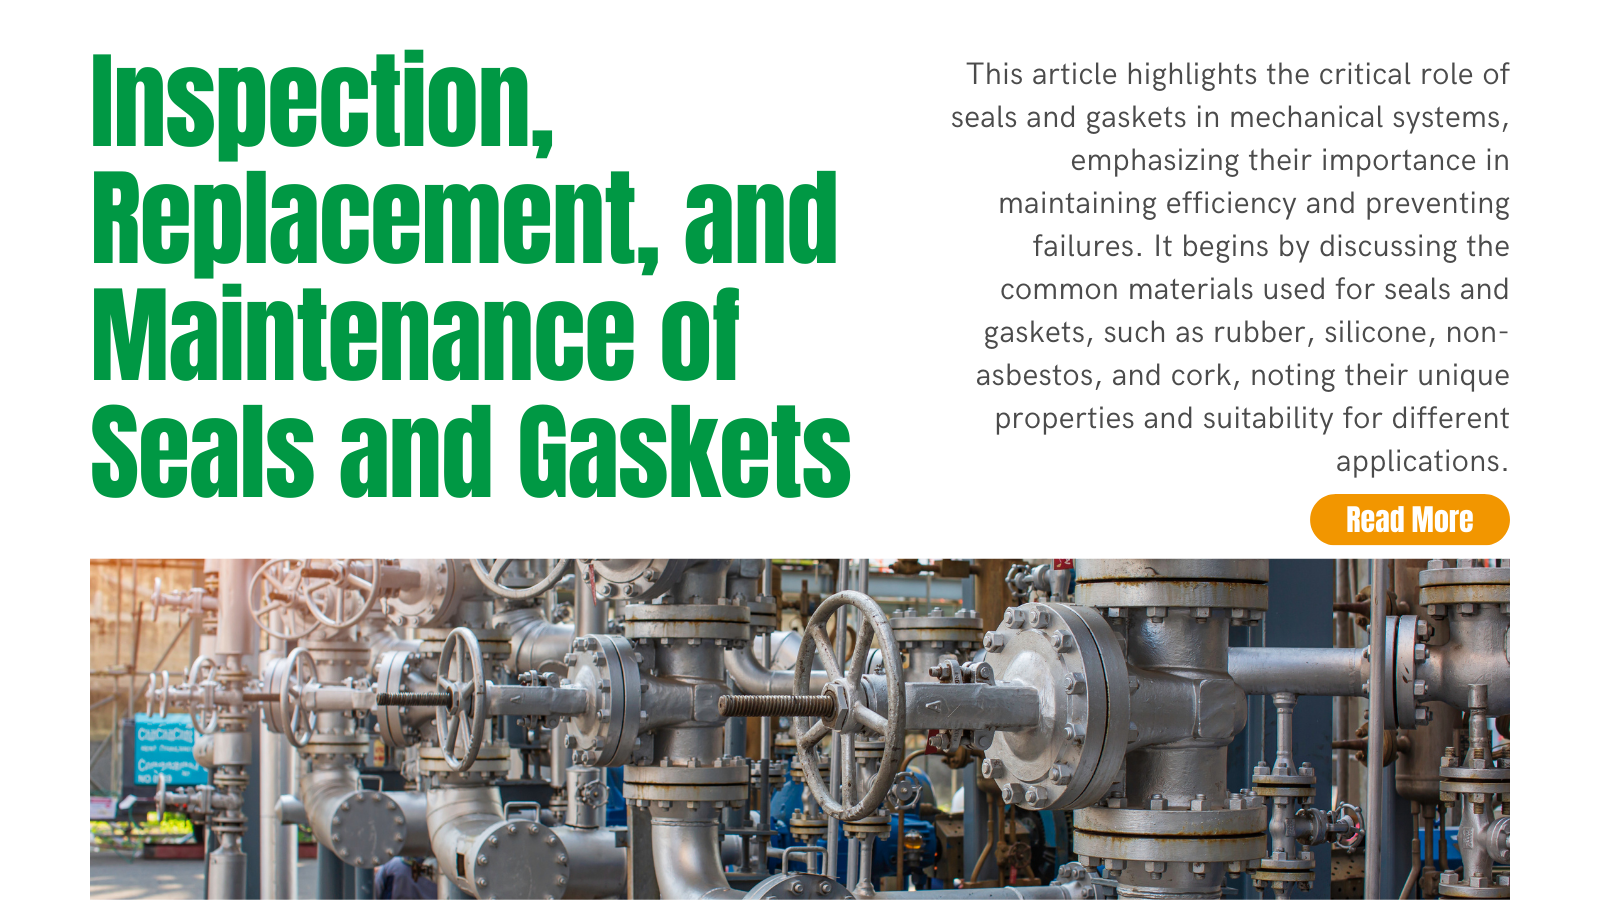 Inspection, Replacement, and Maintenance of Seals and Gaskets | INOX-TEK